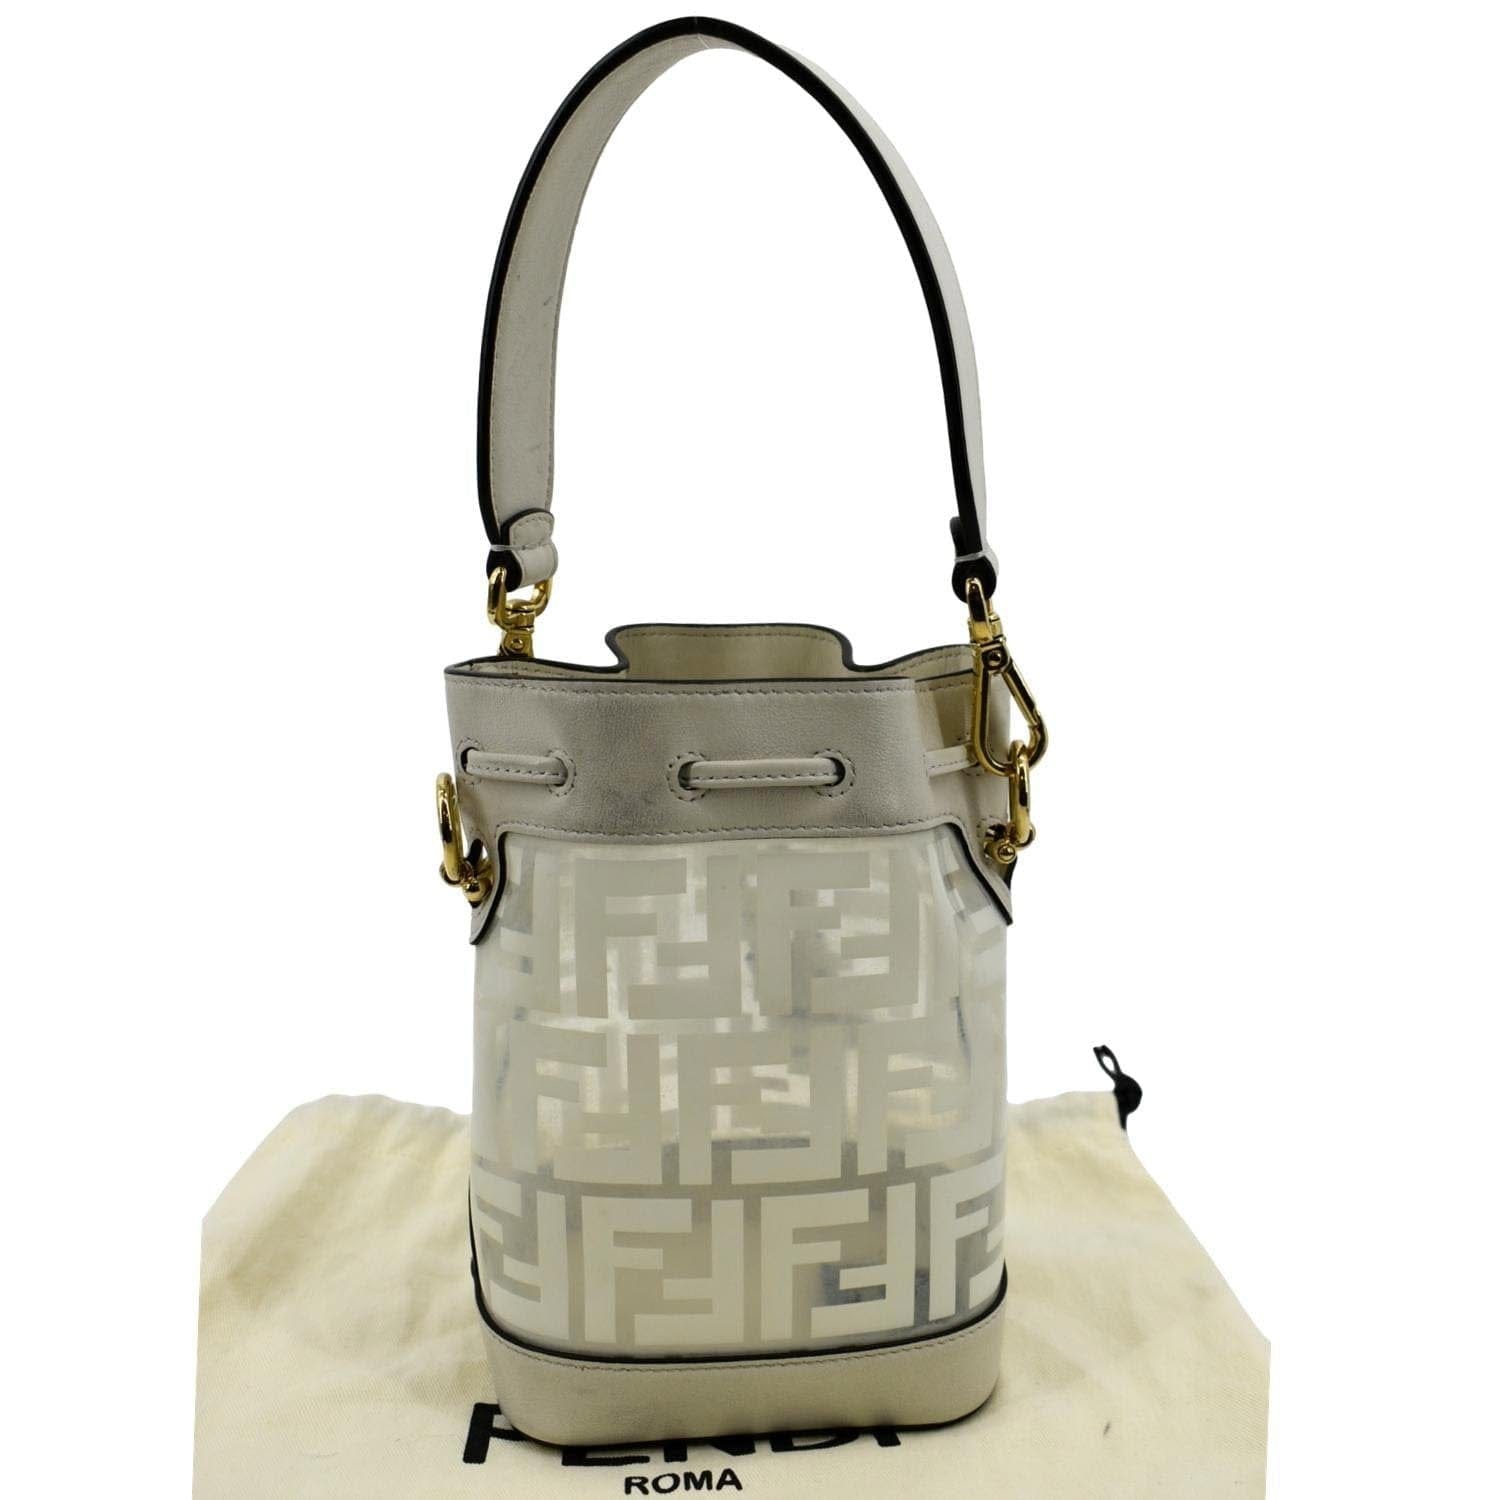 Fendi-Fendi Mon Tresor The Fendi Mon Tresor Bucket Bag was first